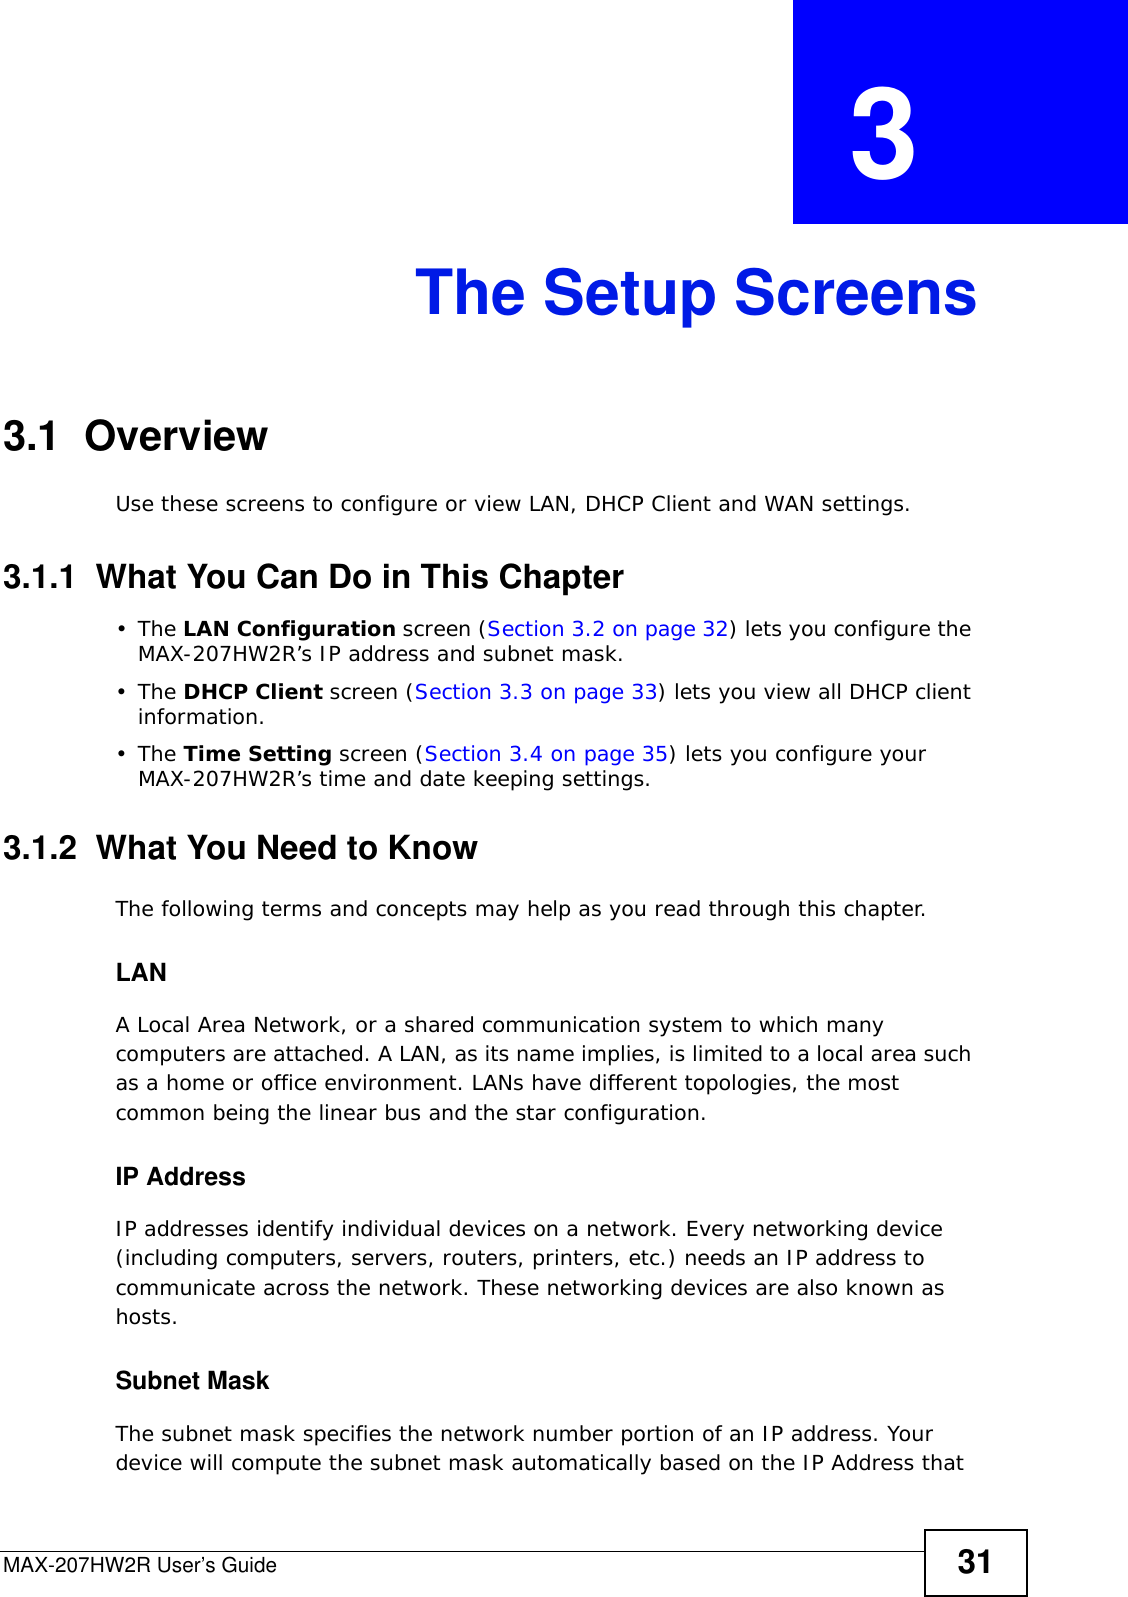 MAX-207HW2R User’s Guide 31CHAPTER  3 The Setup Screens3.1  OverviewUse these screens to configure or view LAN, DHCP Client and WAN settings.3.1.1  What You Can Do in This Chapter•The LAN Configuration screen (Section 3.2 on page 32) lets you configure the MAX-207HW2R’s IP address and subnet mask.•The DHCP Client screen (Section 3.3 on page 33) lets you view all DHCP client information.•The Time Setting screen (Section 3.4 on page 35) lets you configure your MAX-207HW2R’s time and date keeping settings.3.1.2  What You Need to KnowThe following terms and concepts may help as you read through this chapter.LANA Local Area Network, or a shared communication system to which many computers are attached. A LAN, as its name implies, is limited to a local area such as a home or office environment. LANs have different topologies, the most common being the linear bus and the star configuration.IP AddressIP addresses identify individual devices on a network. Every networking device (including computers, servers, routers, printers, etc.) needs an IP address to communicate across the network. These networking devices are also known as hosts.Subnet MaskThe subnet mask specifies the network number portion of an IP address. Your device will compute the subnet mask automatically based on the IP Address that 